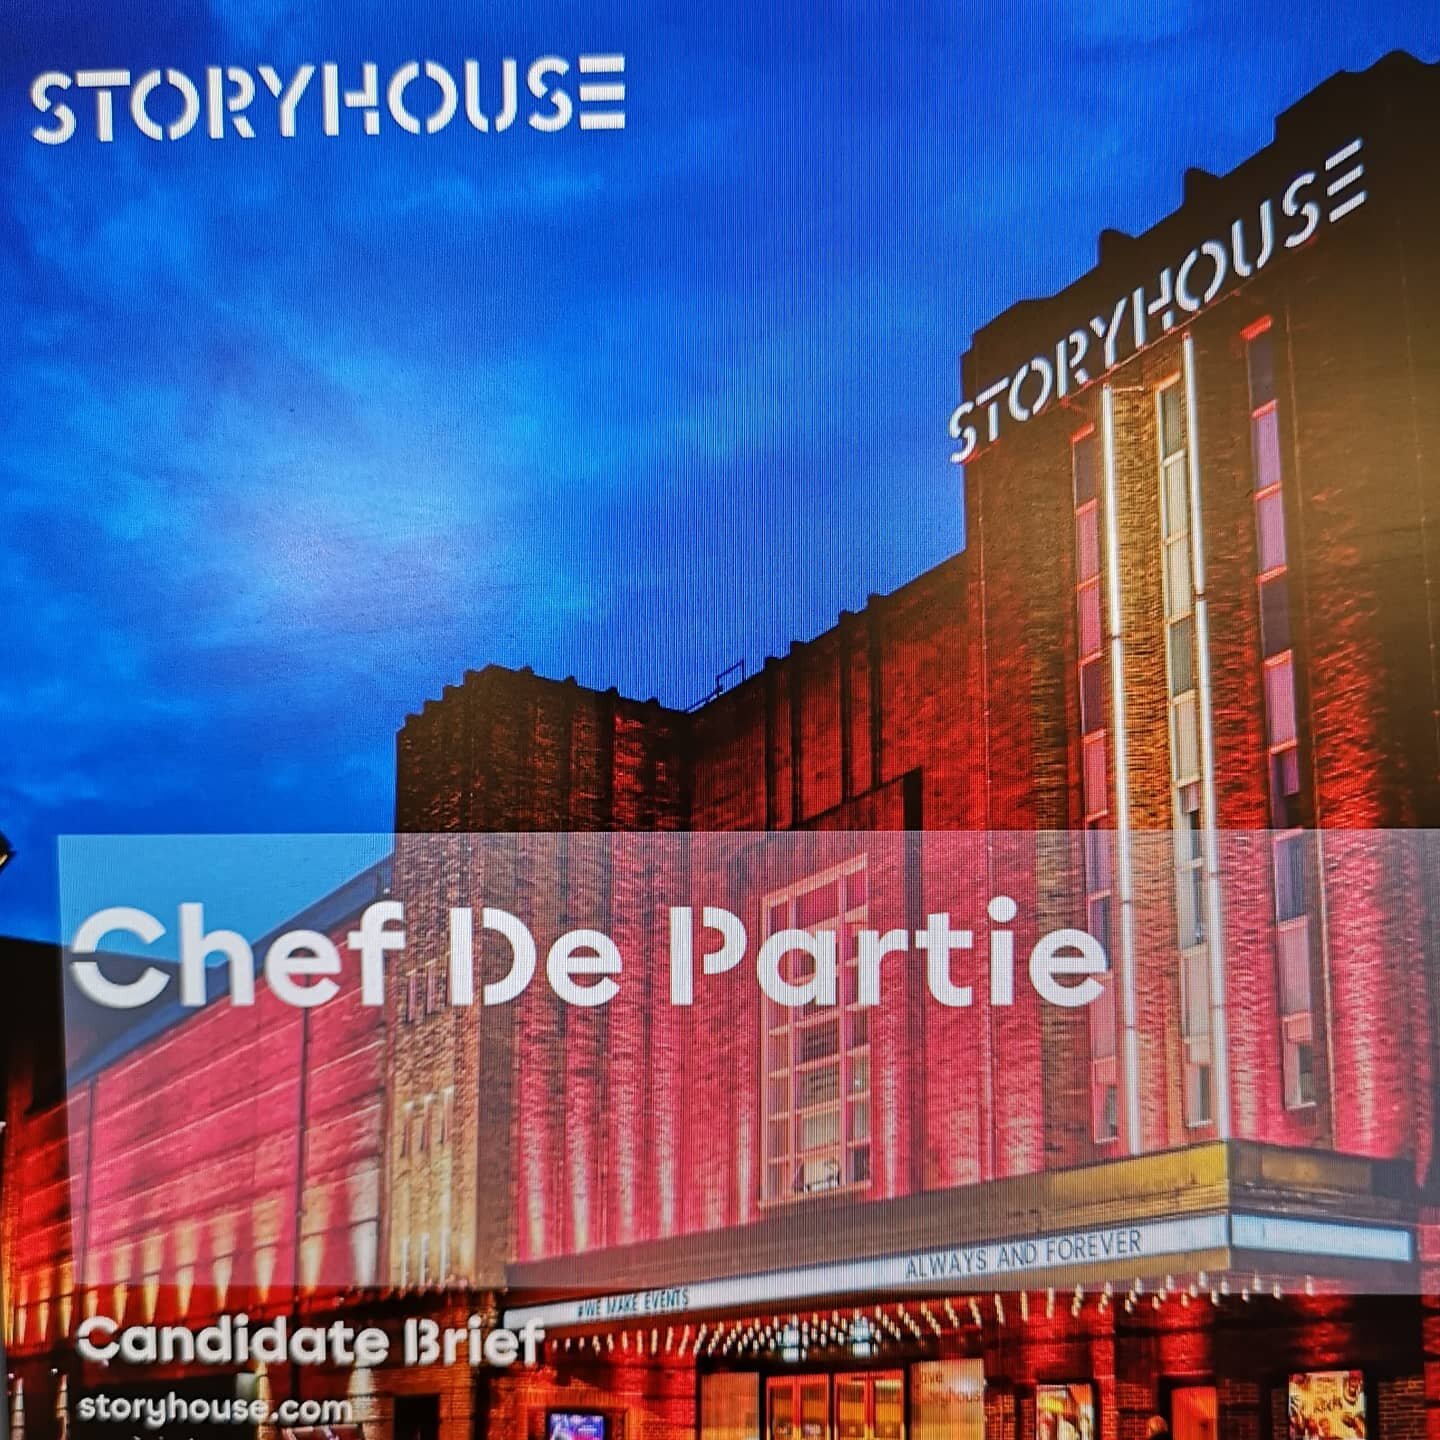 We have a vacancy for a Chef De Partie. Come and join our band of merry chefs. Fresh, vibrant, Levantine food, served in a relaxed atmosphere.

For details, visit - 

https://www.storyhouse.com/